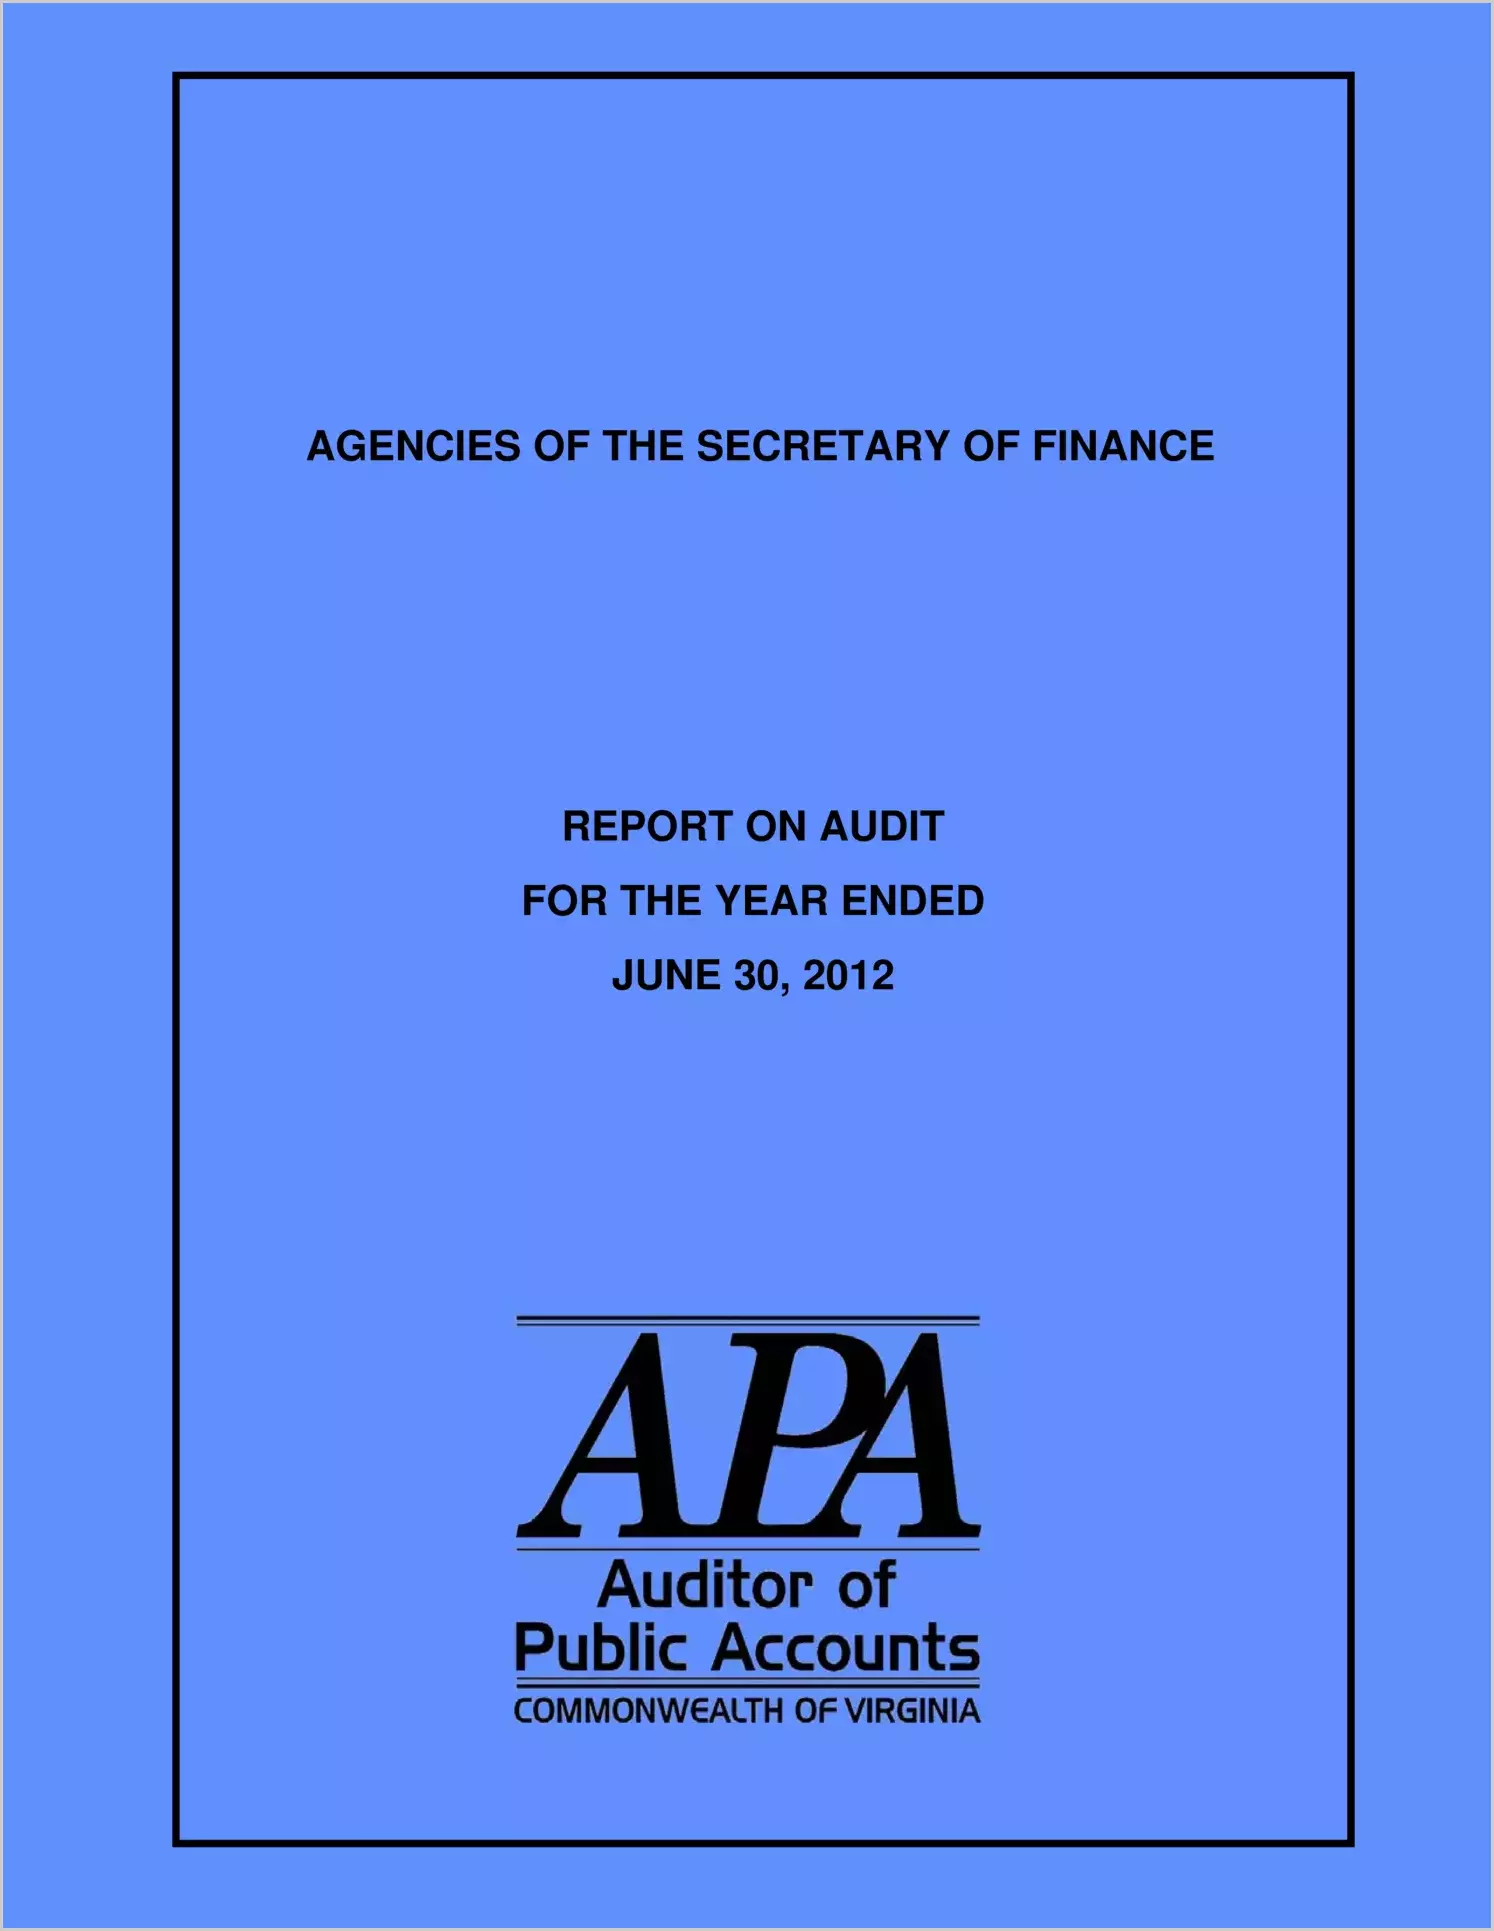 Agencies of the Secretary of Finance report on audit for the year ended June 30, 2012